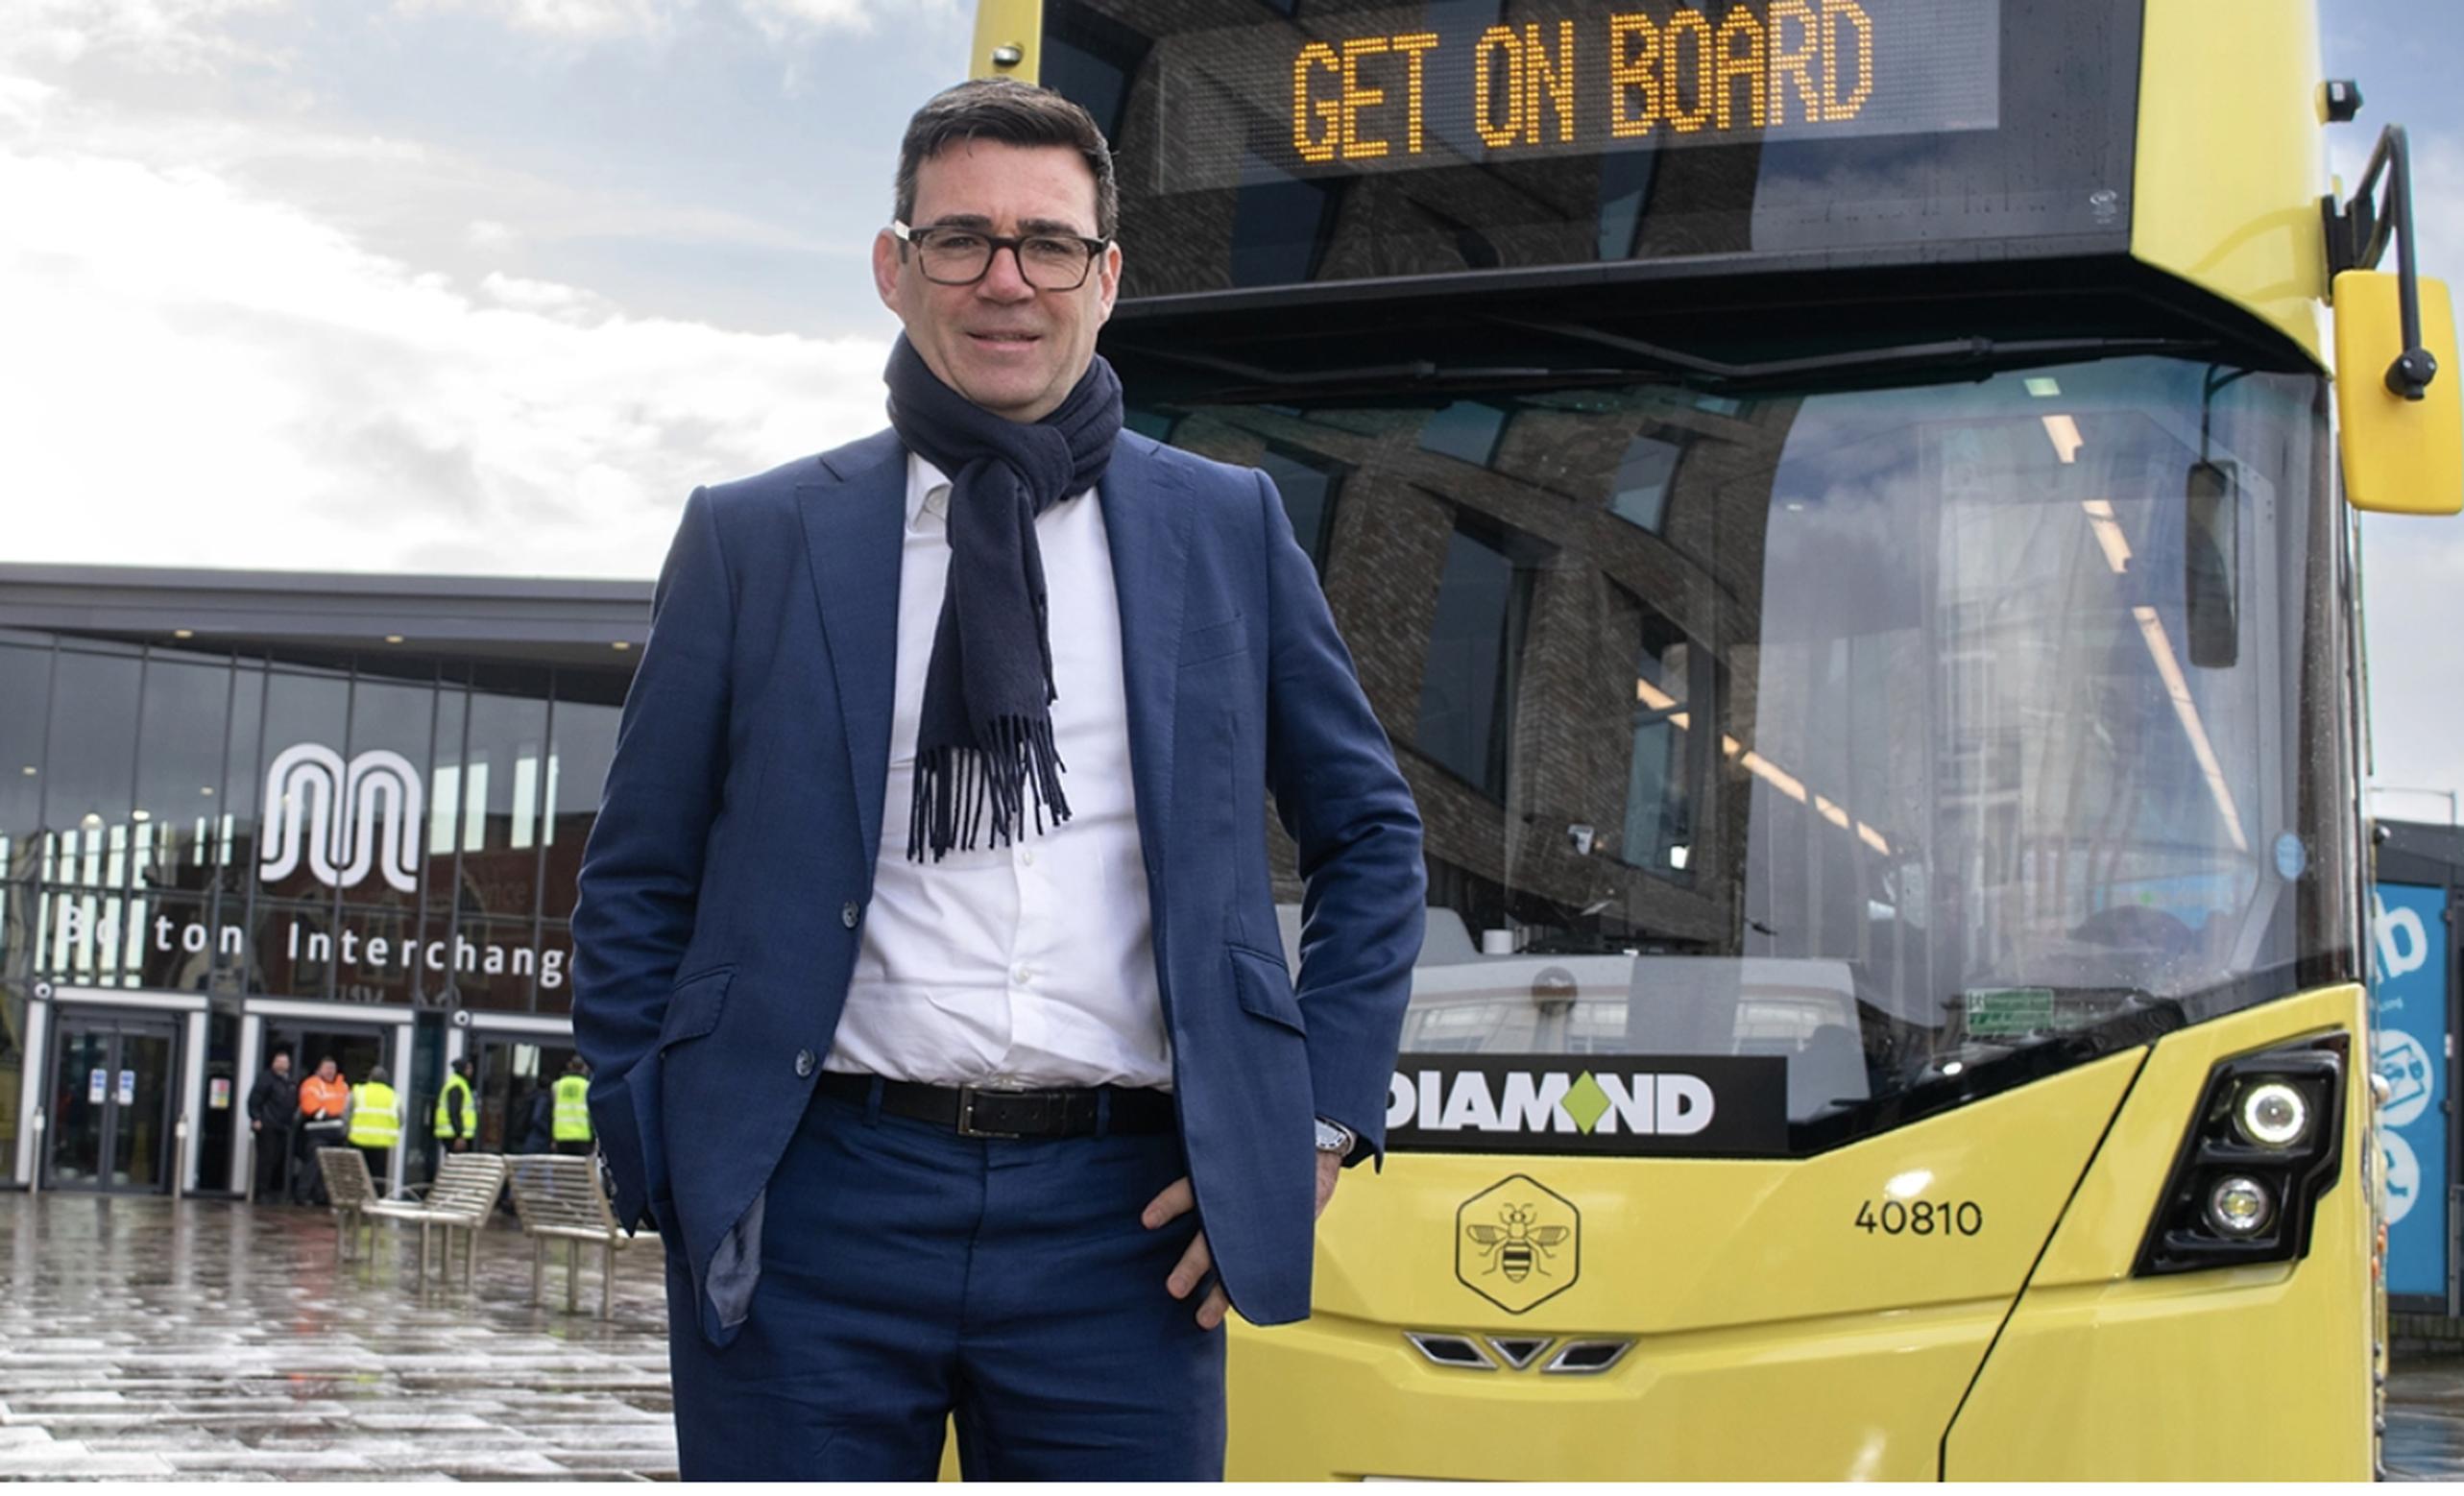 Greater Manchester Mayor Andy Burnham presented the first bus to be operated in the franchised Bee Network